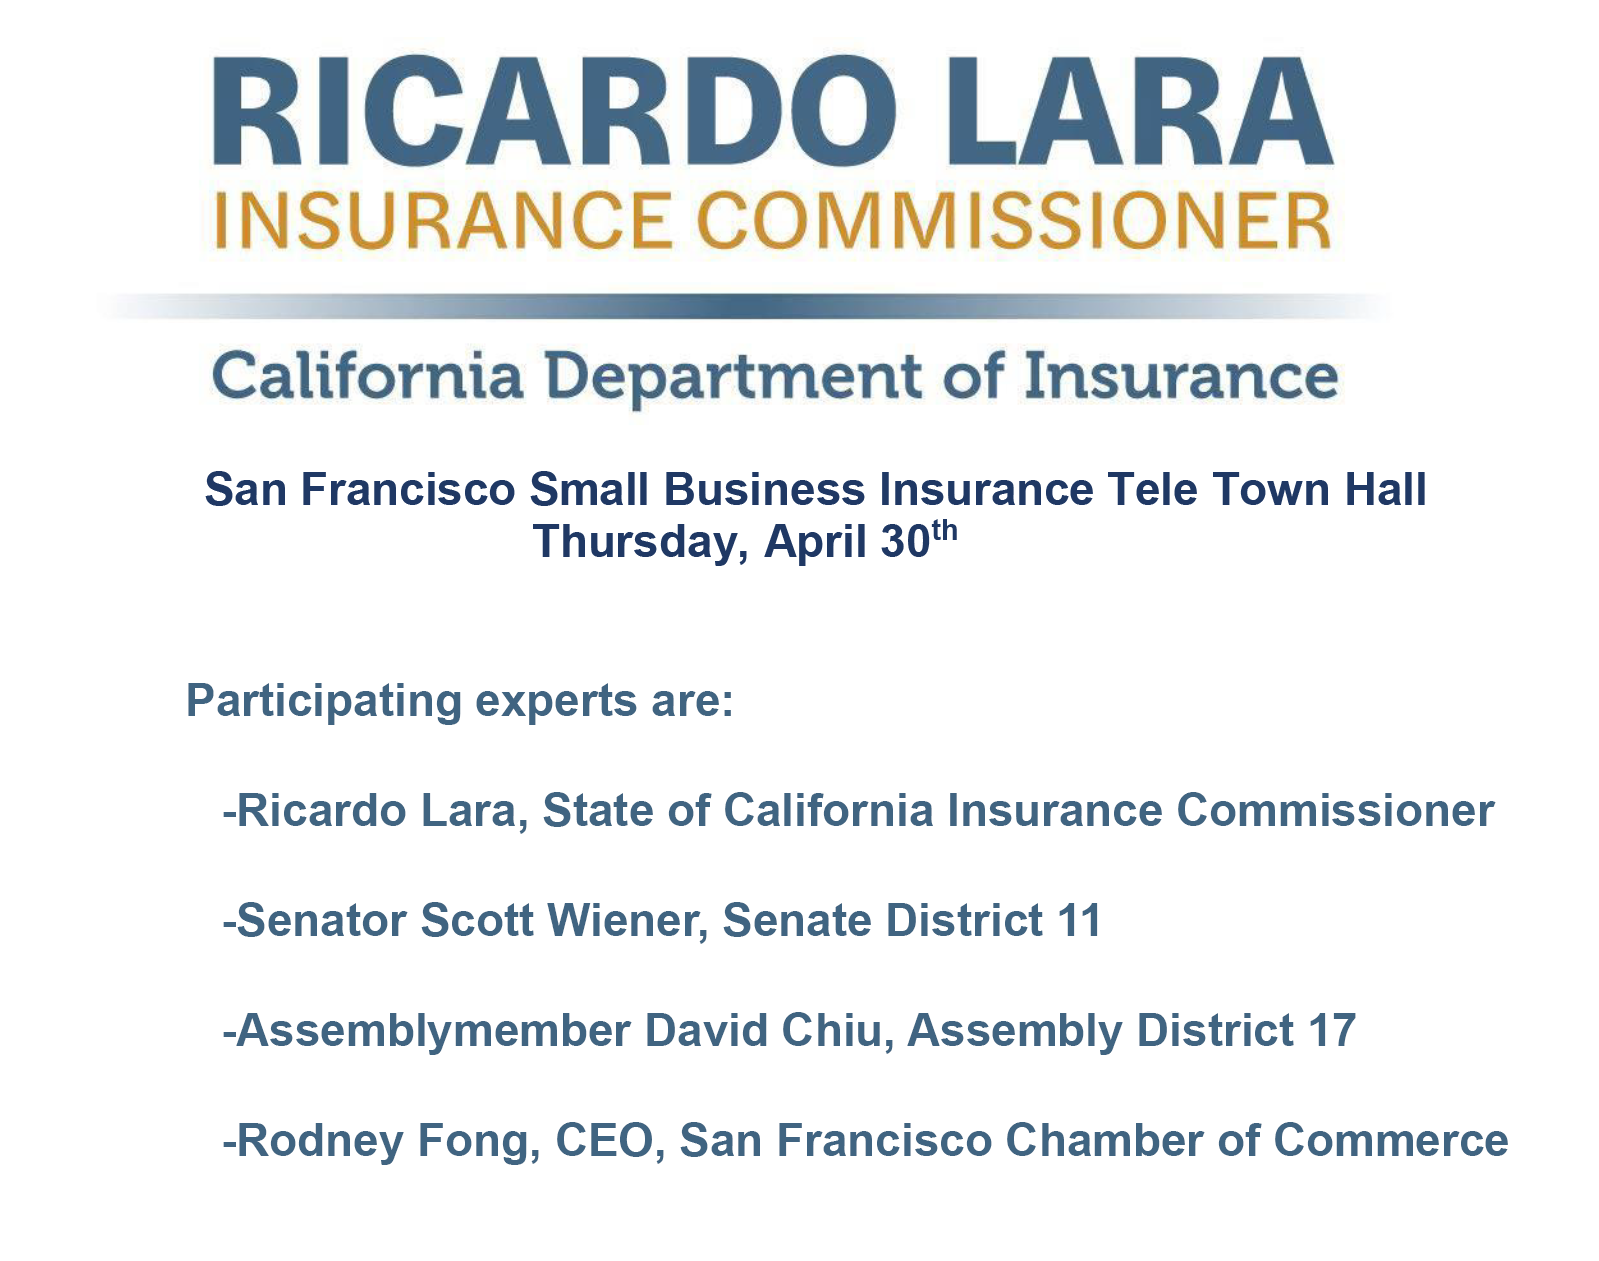 San Francisco Small business insurance tele townhall. Thursday April 30th at 1pm . Participating experts will be state of California Insurance commissioner, Ricardo Lara, Senator Scott Wiener, Assemblymember Chiu and CEO of SF chamber of commerce